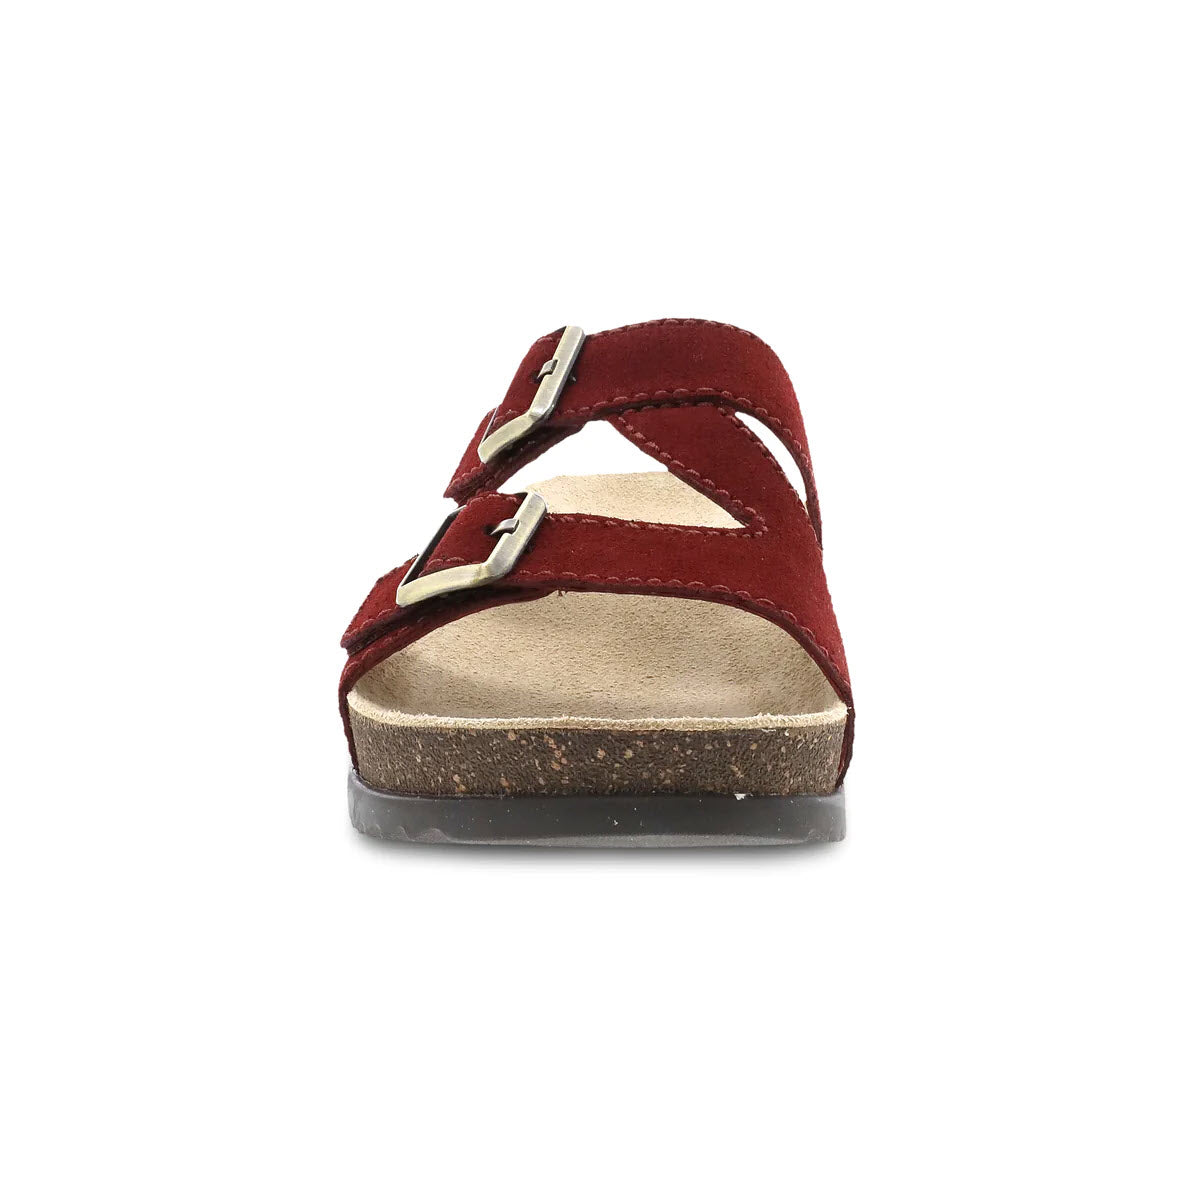 Dansko red chrome-free suede sandal with two buckled straps and a cork sole, photographed against a white background.